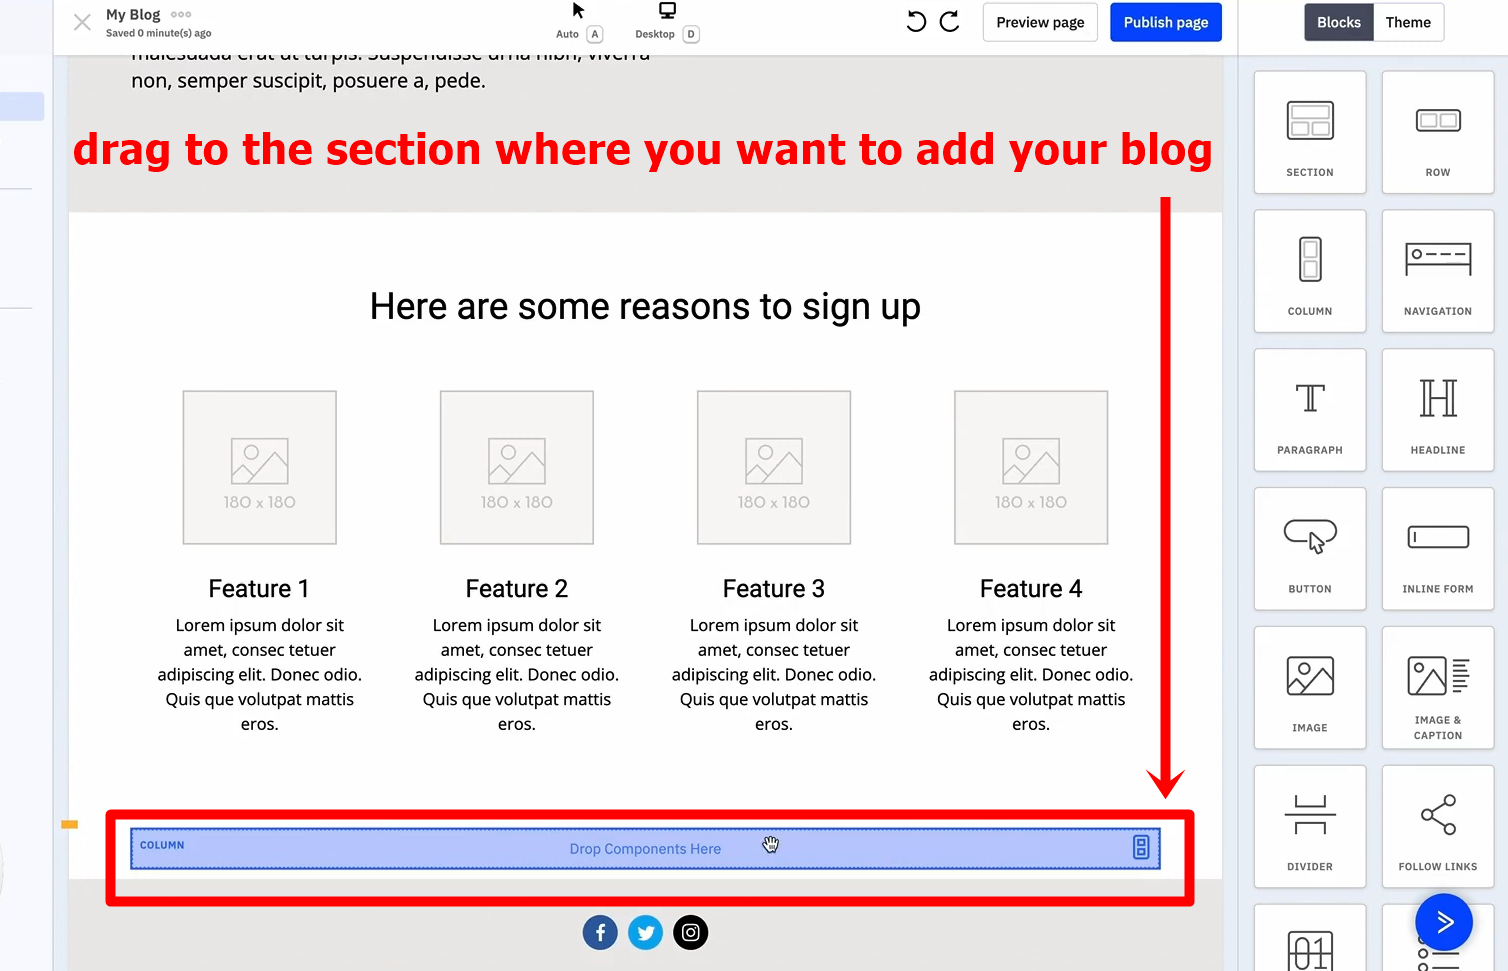 7 drag the section to where you want to add your blog